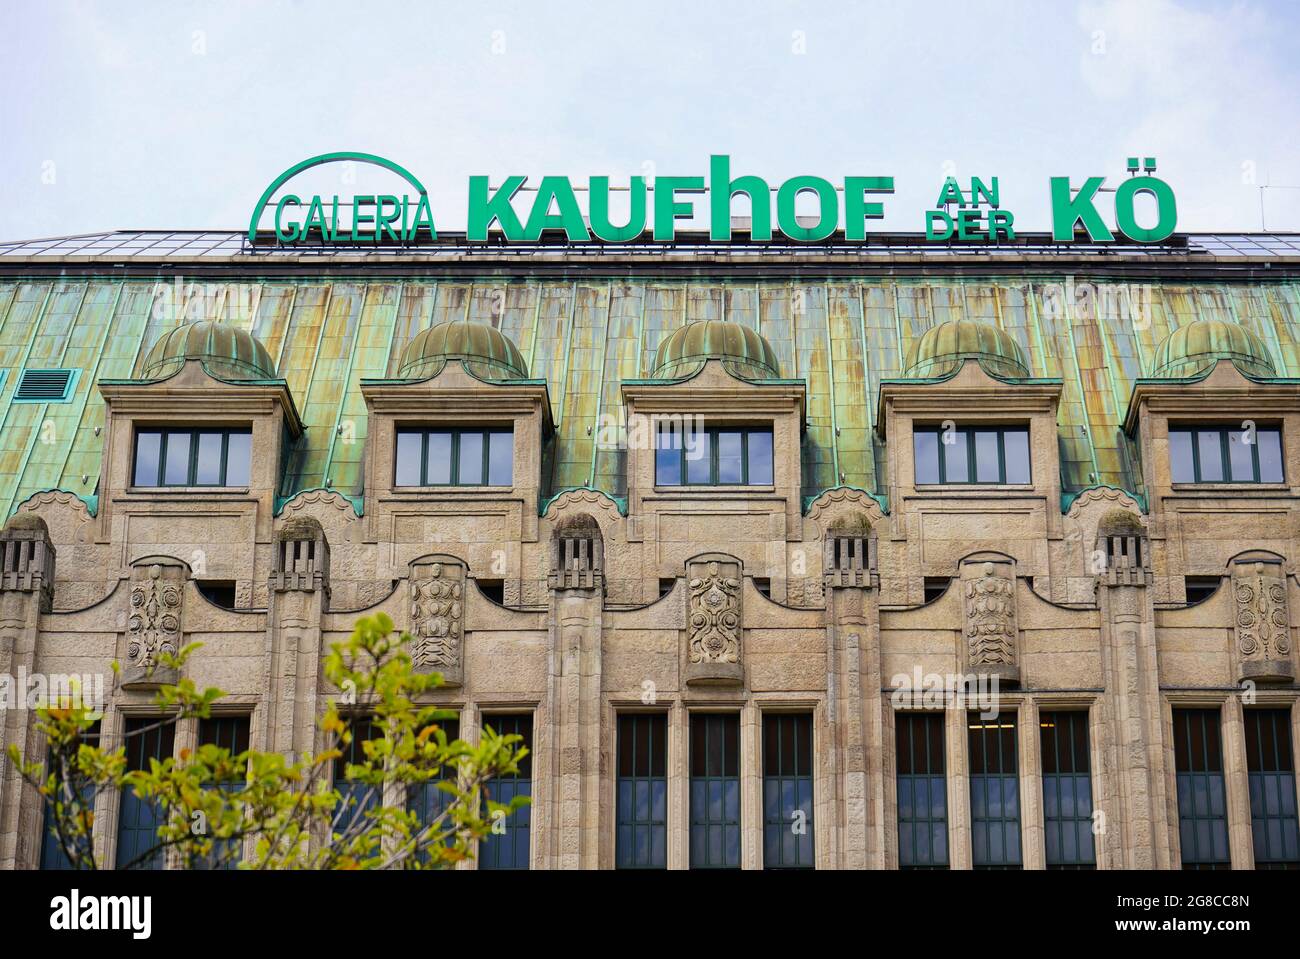 Old building of the well-known department store 'Kaufhof an der Kö', built 1907 - 1909. 'Kö' refers to the shopping boulevard 'Königsallee'. Stock Photo